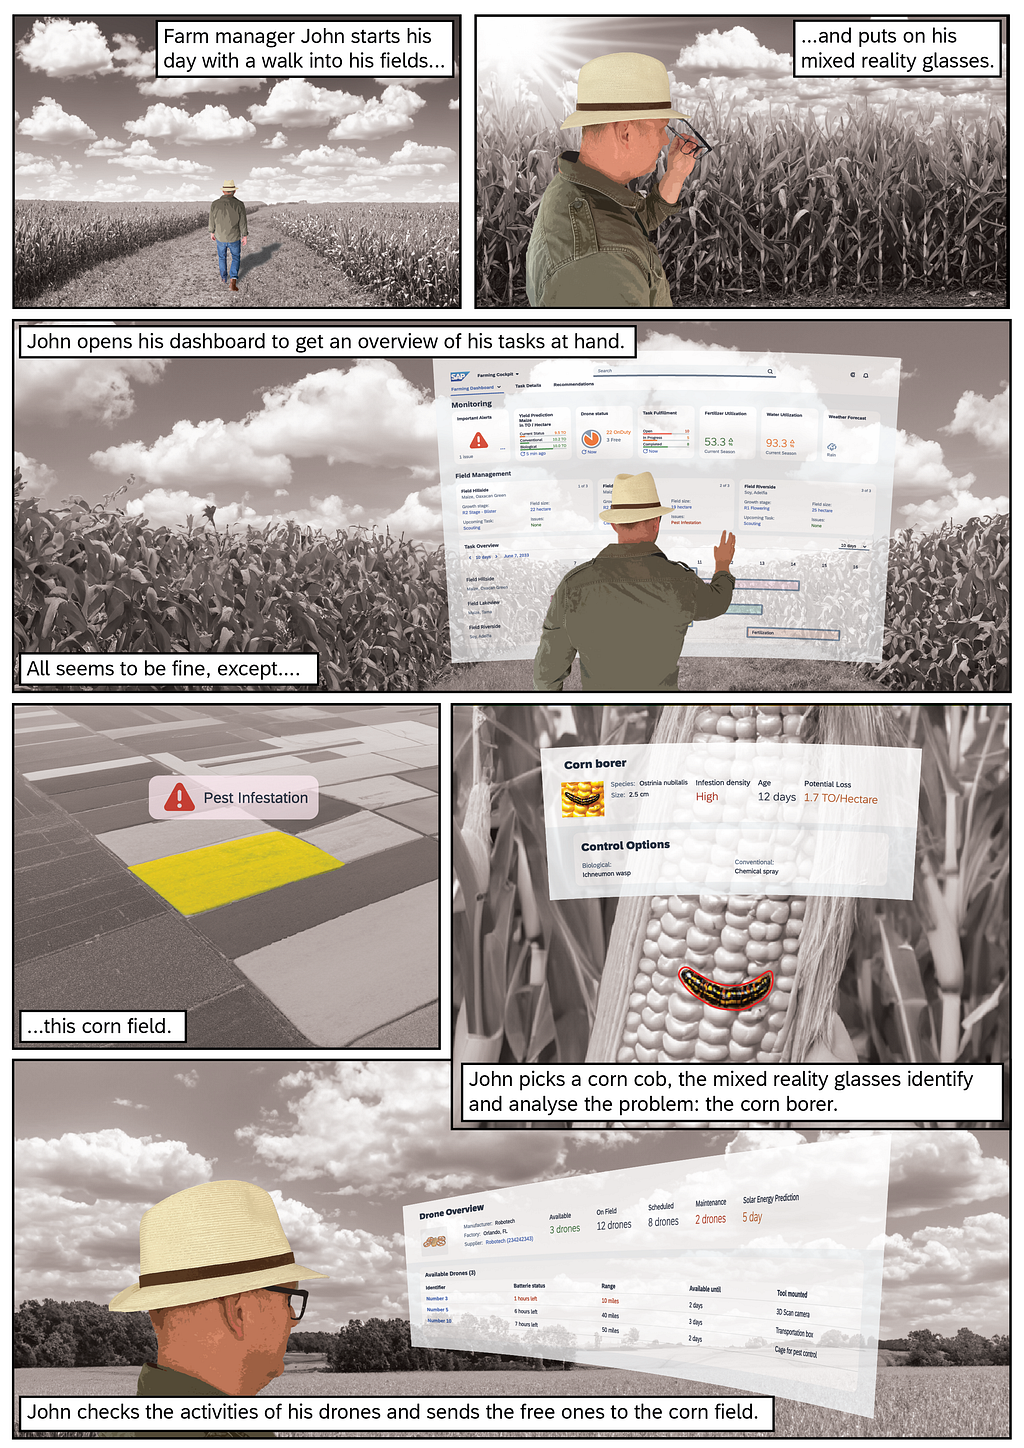 An immersive storyboard for SAP Intelligent Agriculture. In the storyboard, a farmer named John is seen standing in a corn field accessing a hologram of the app’s UI. In the story, he identifies a pest infestation and sends a drone to the fields to manage the pest. A week later, John again pulls up the hologram dashboard and sees the control of the infestation was a success.